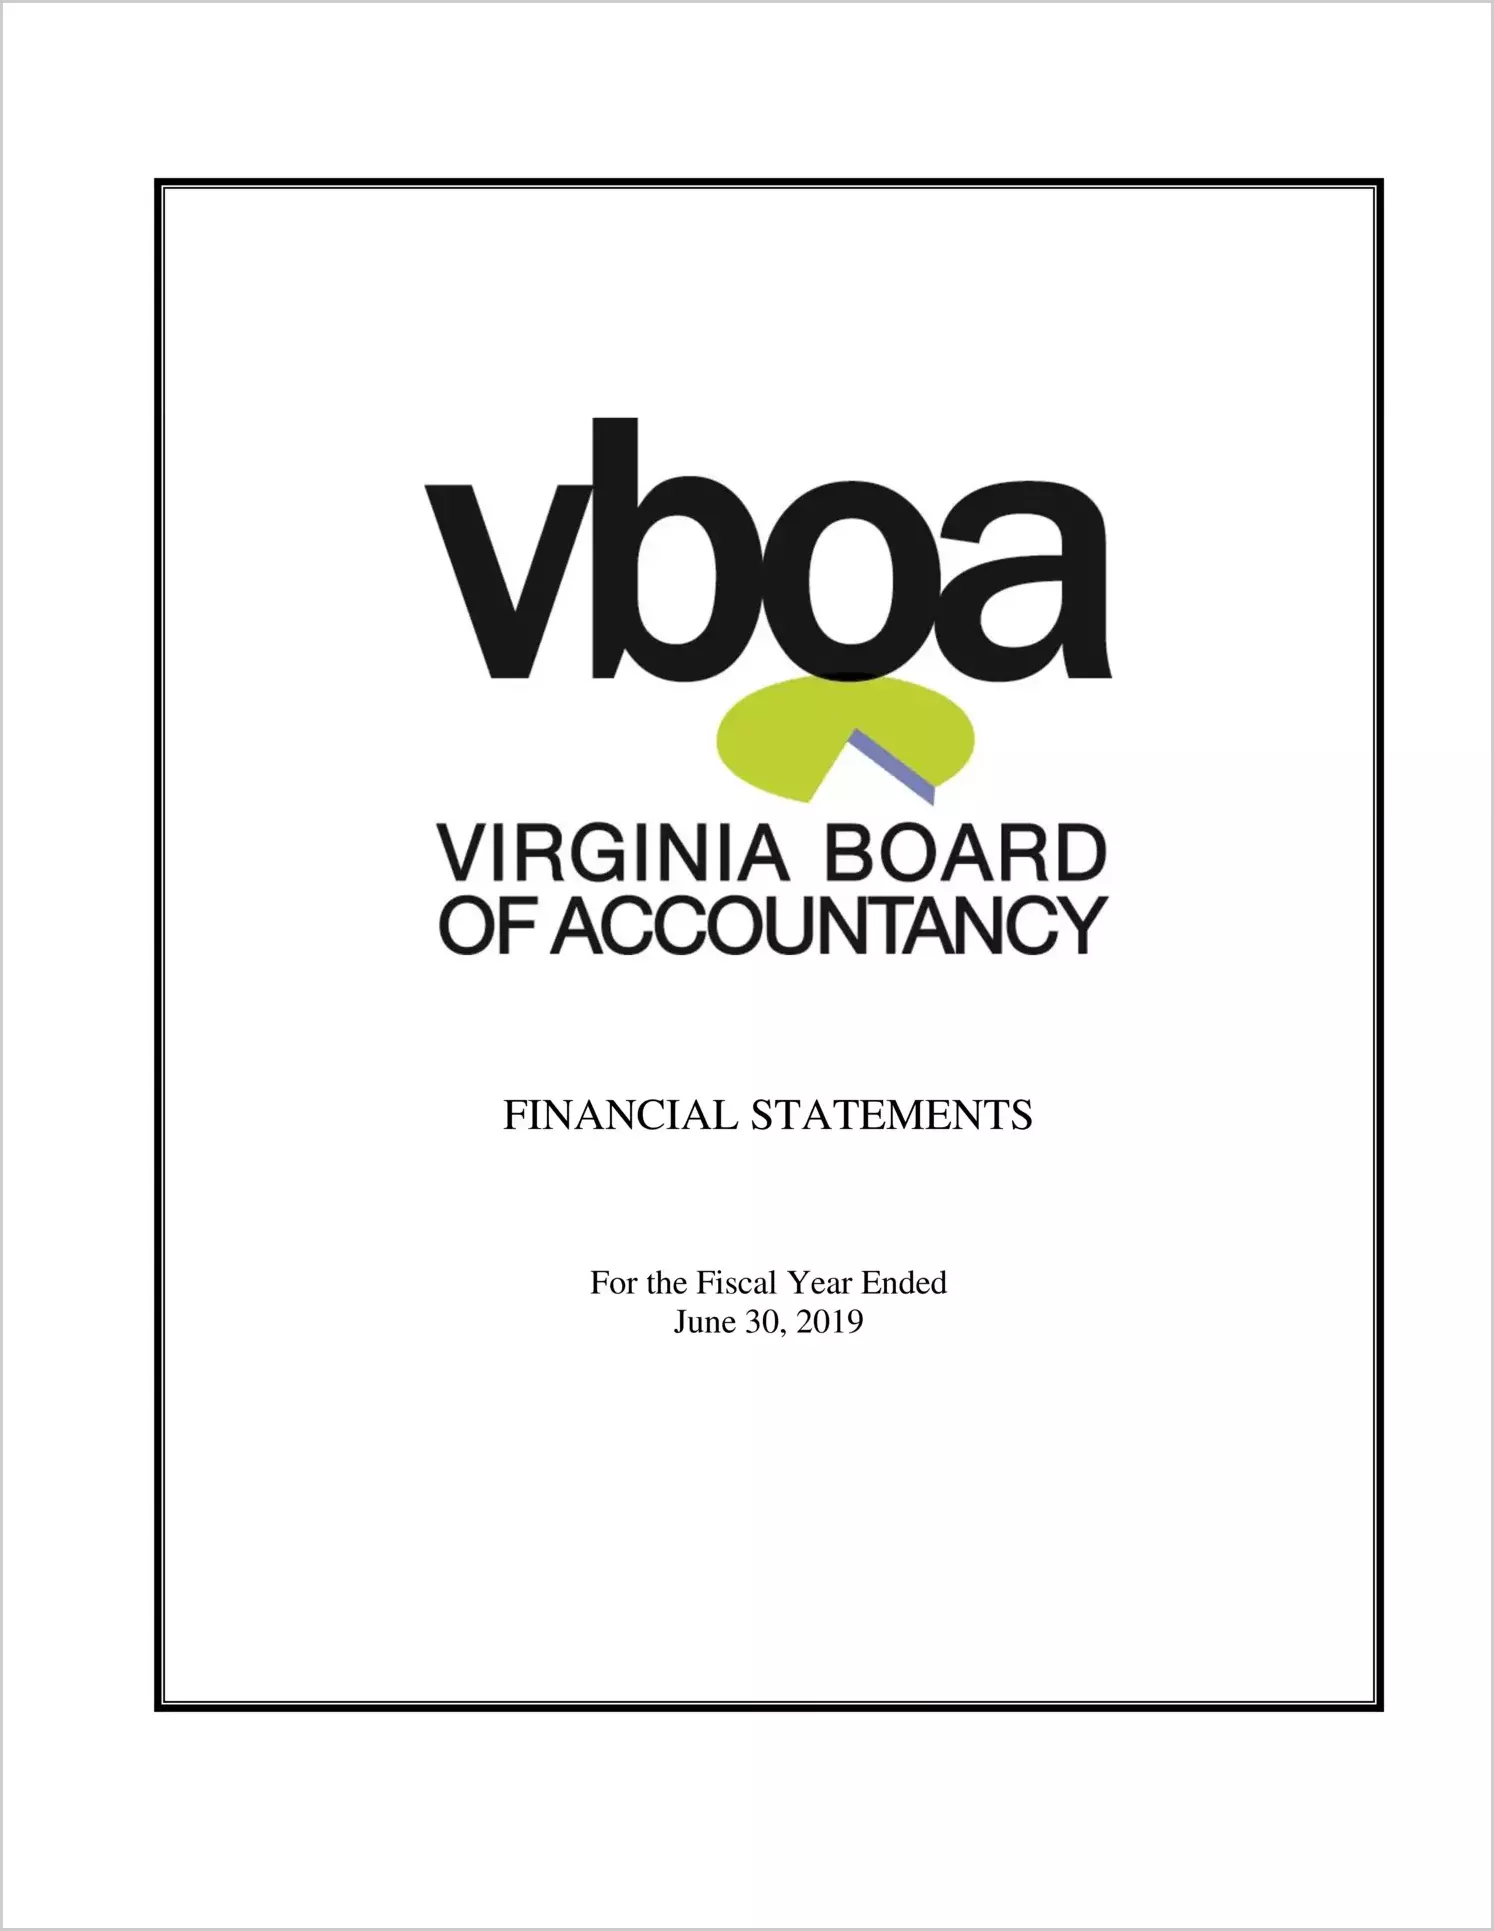 Virginia Board of Accountancy Financial Statements for the year ended June 30, 2019